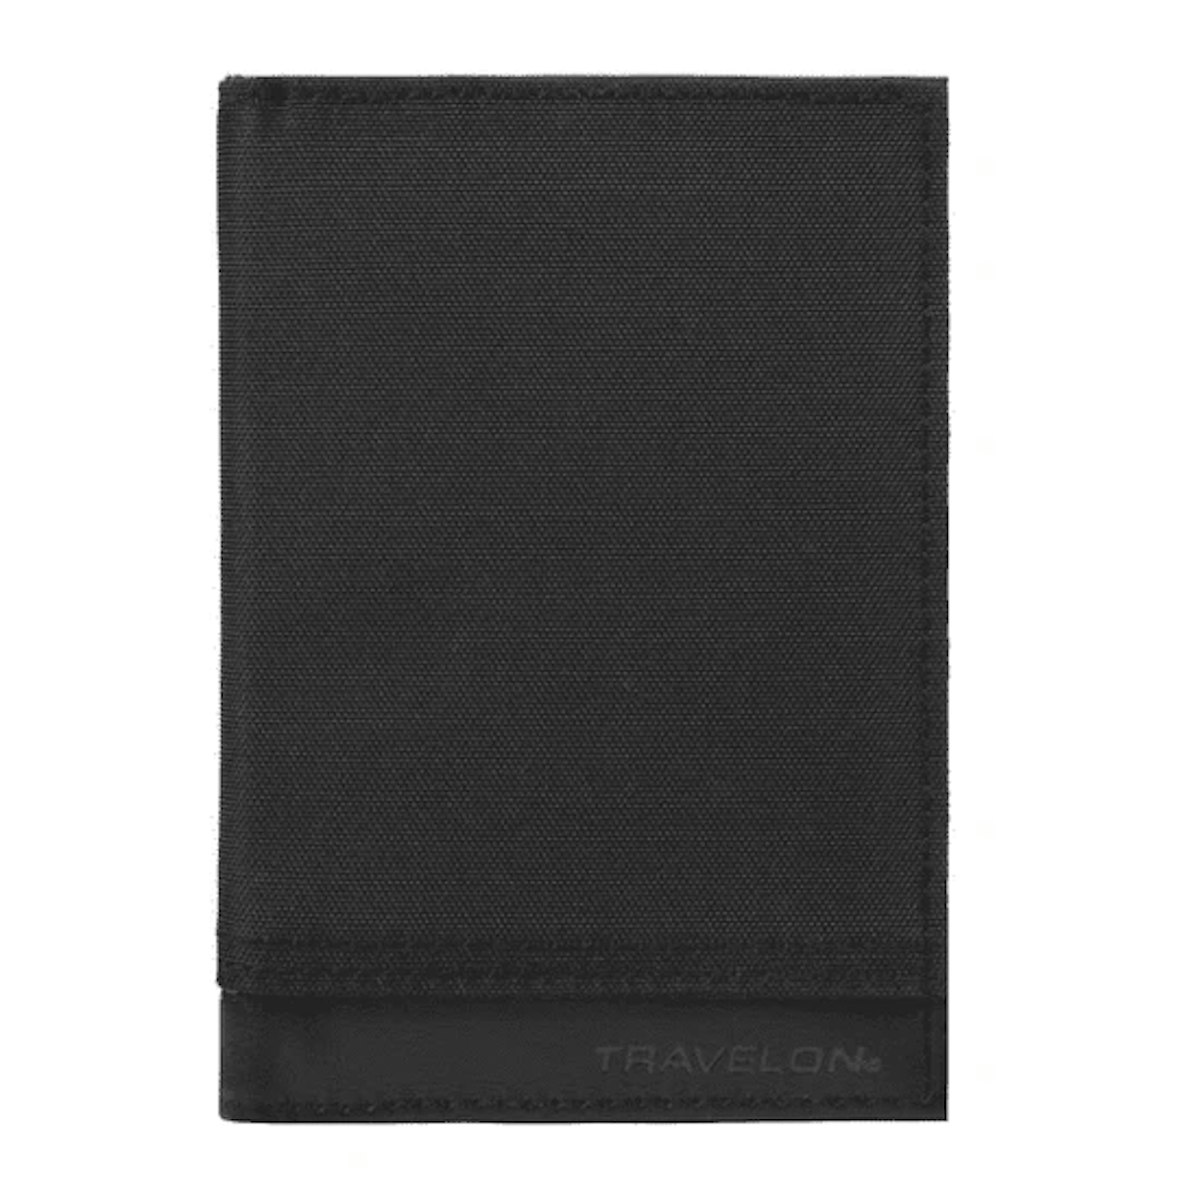 A black wallet on a white background.